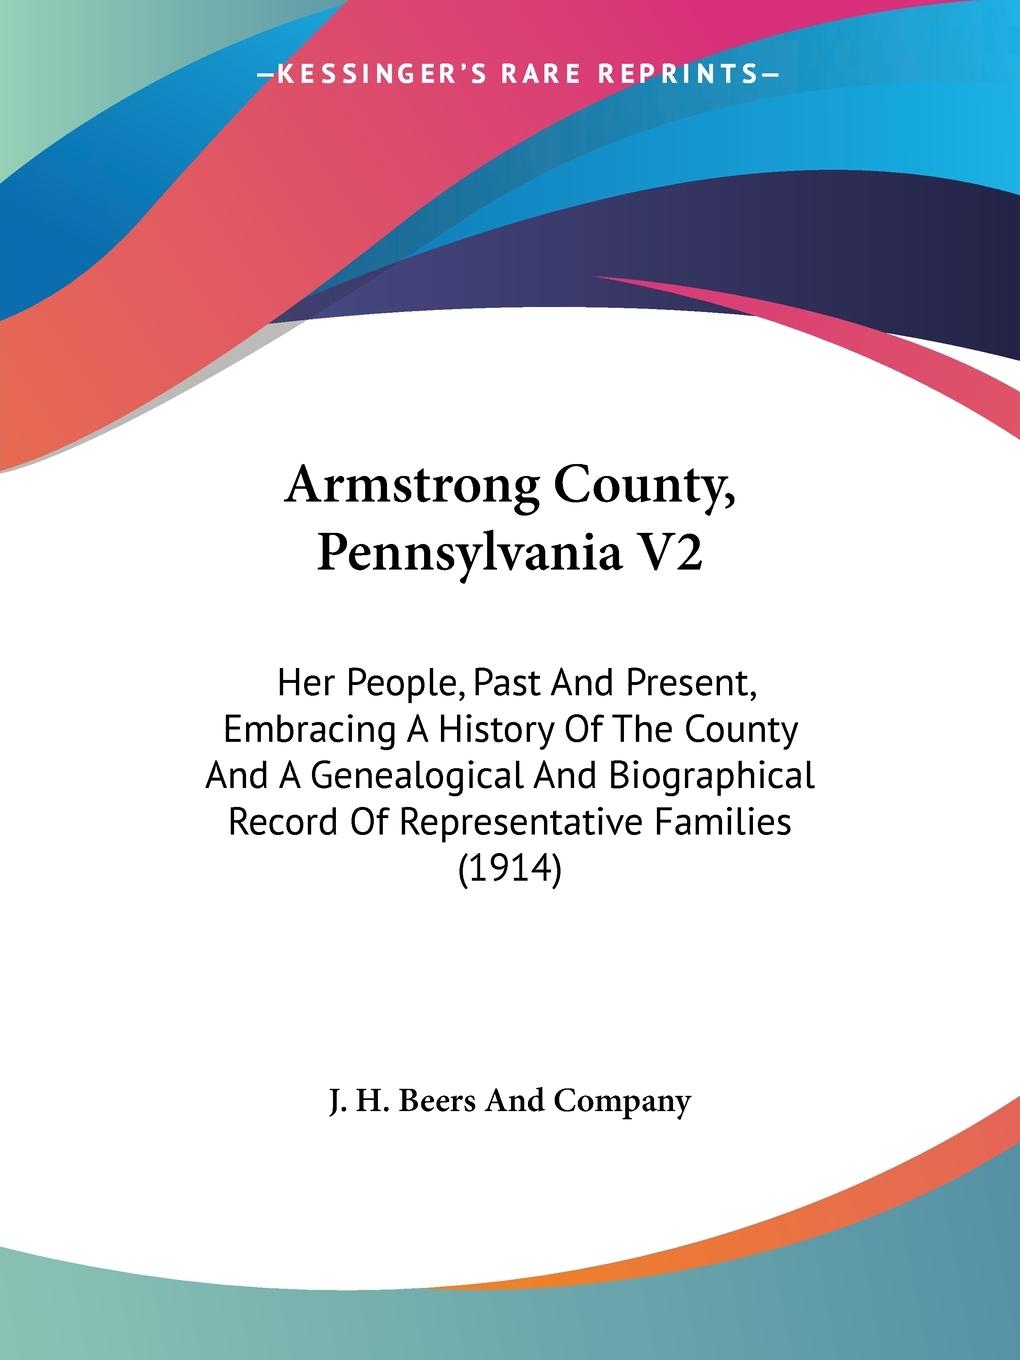 Armstrong County, Pennsylvania V2 - J. H. Beers And Company